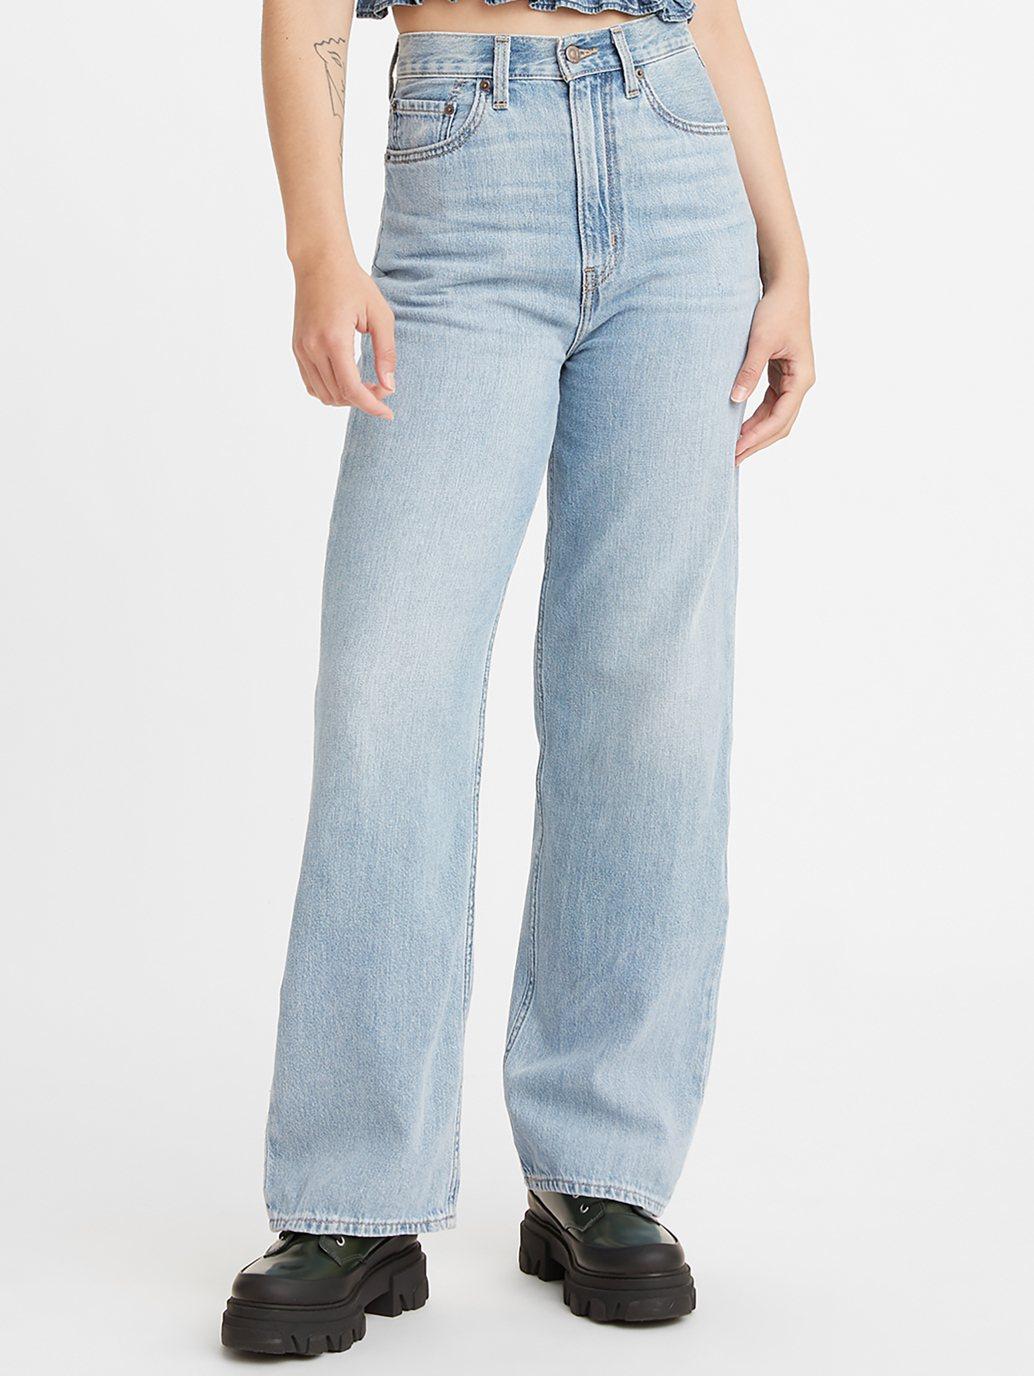 Buy Levi's® Women's High Loose Jeans | Levi's® Official Online Store MY